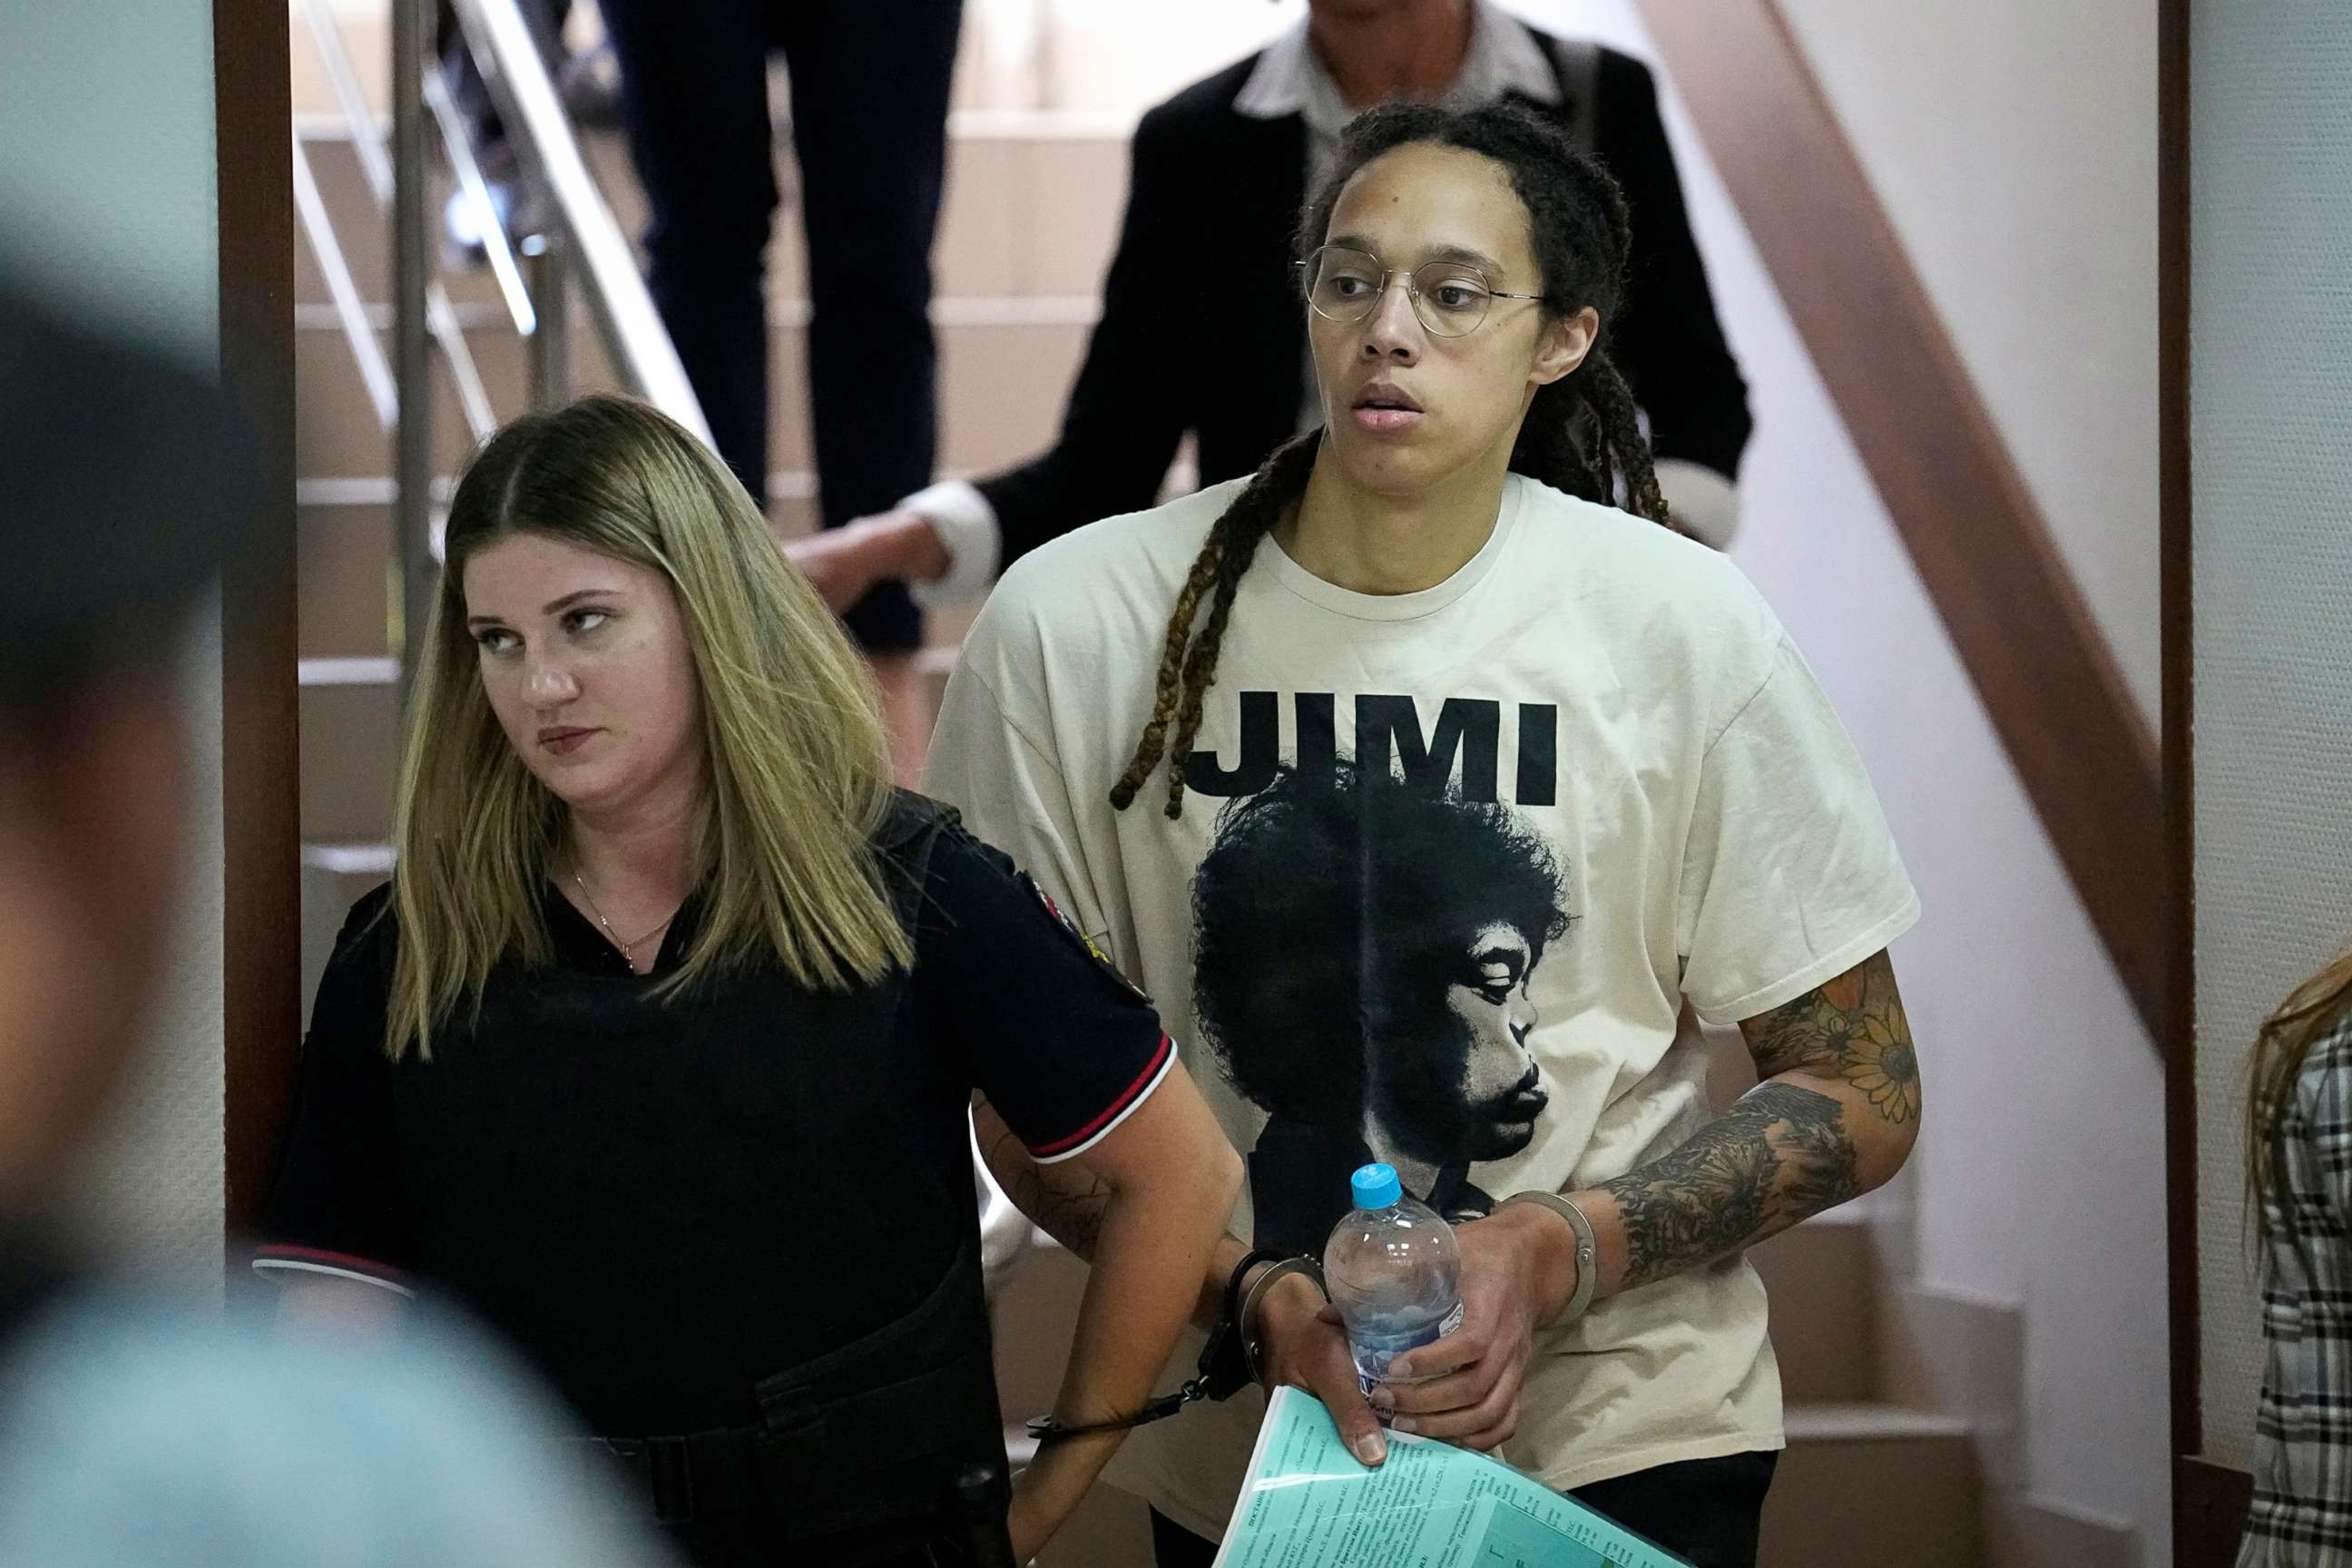 PHOTO: WNBA star and two-time Olympic gold medalist Brittney Griner is escorted to a courtroom for a hearing, in Khimki just outside Moscow, July 1, 2022.